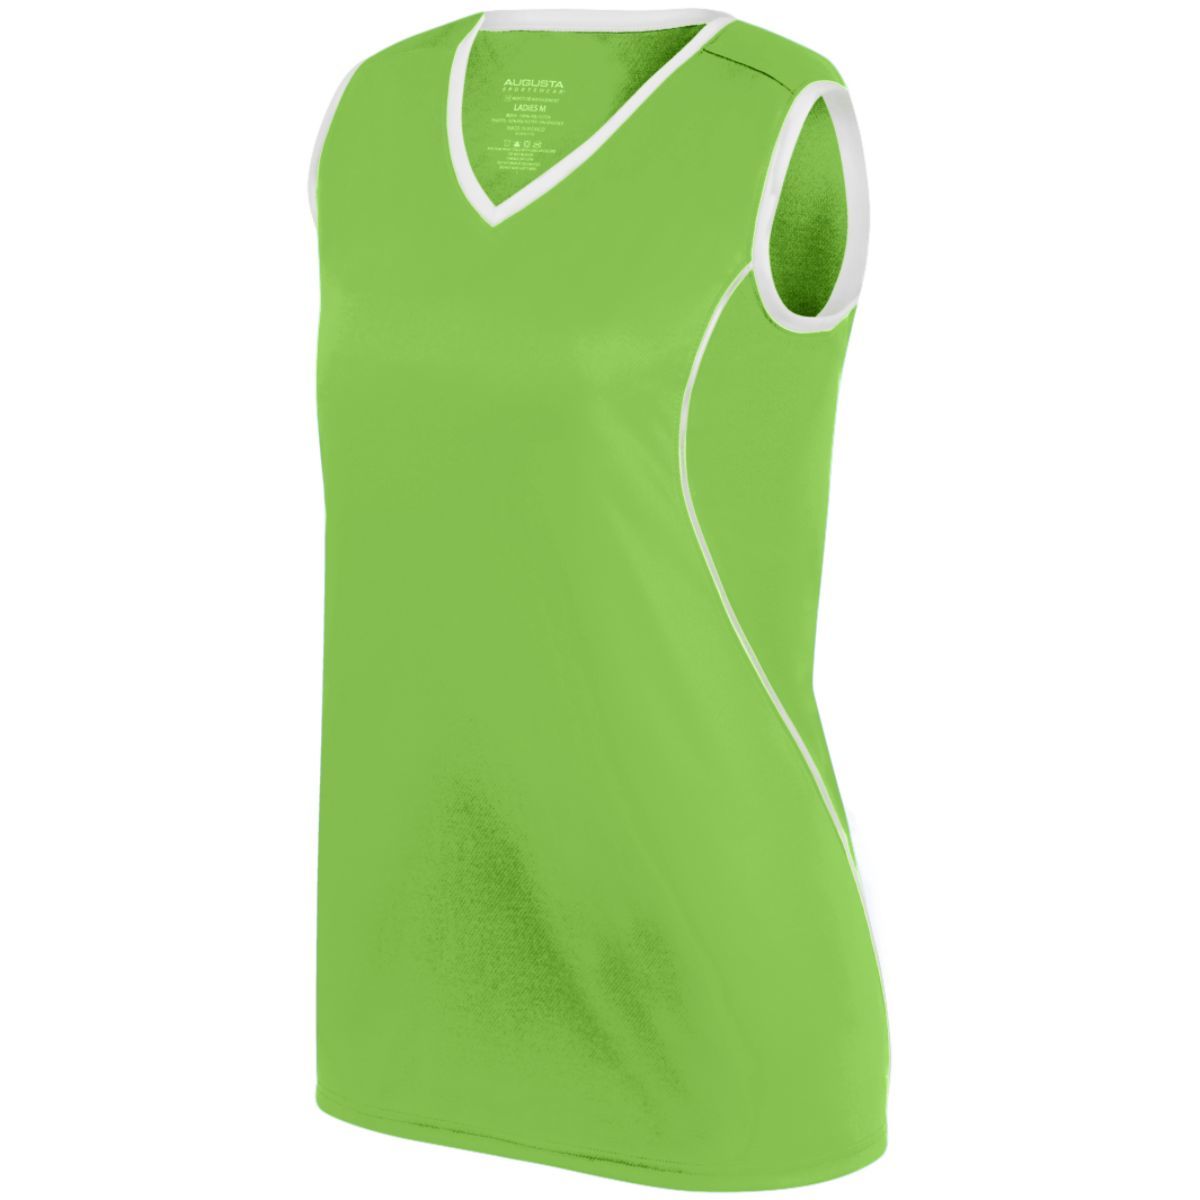 Augusta Sportswear Ladies Firebolt Jersey in Lime/White  -Part of the Ladies, Ladies-Jersey, Augusta-Products, Softball, Shirts product lines at KanaleyCreations.com